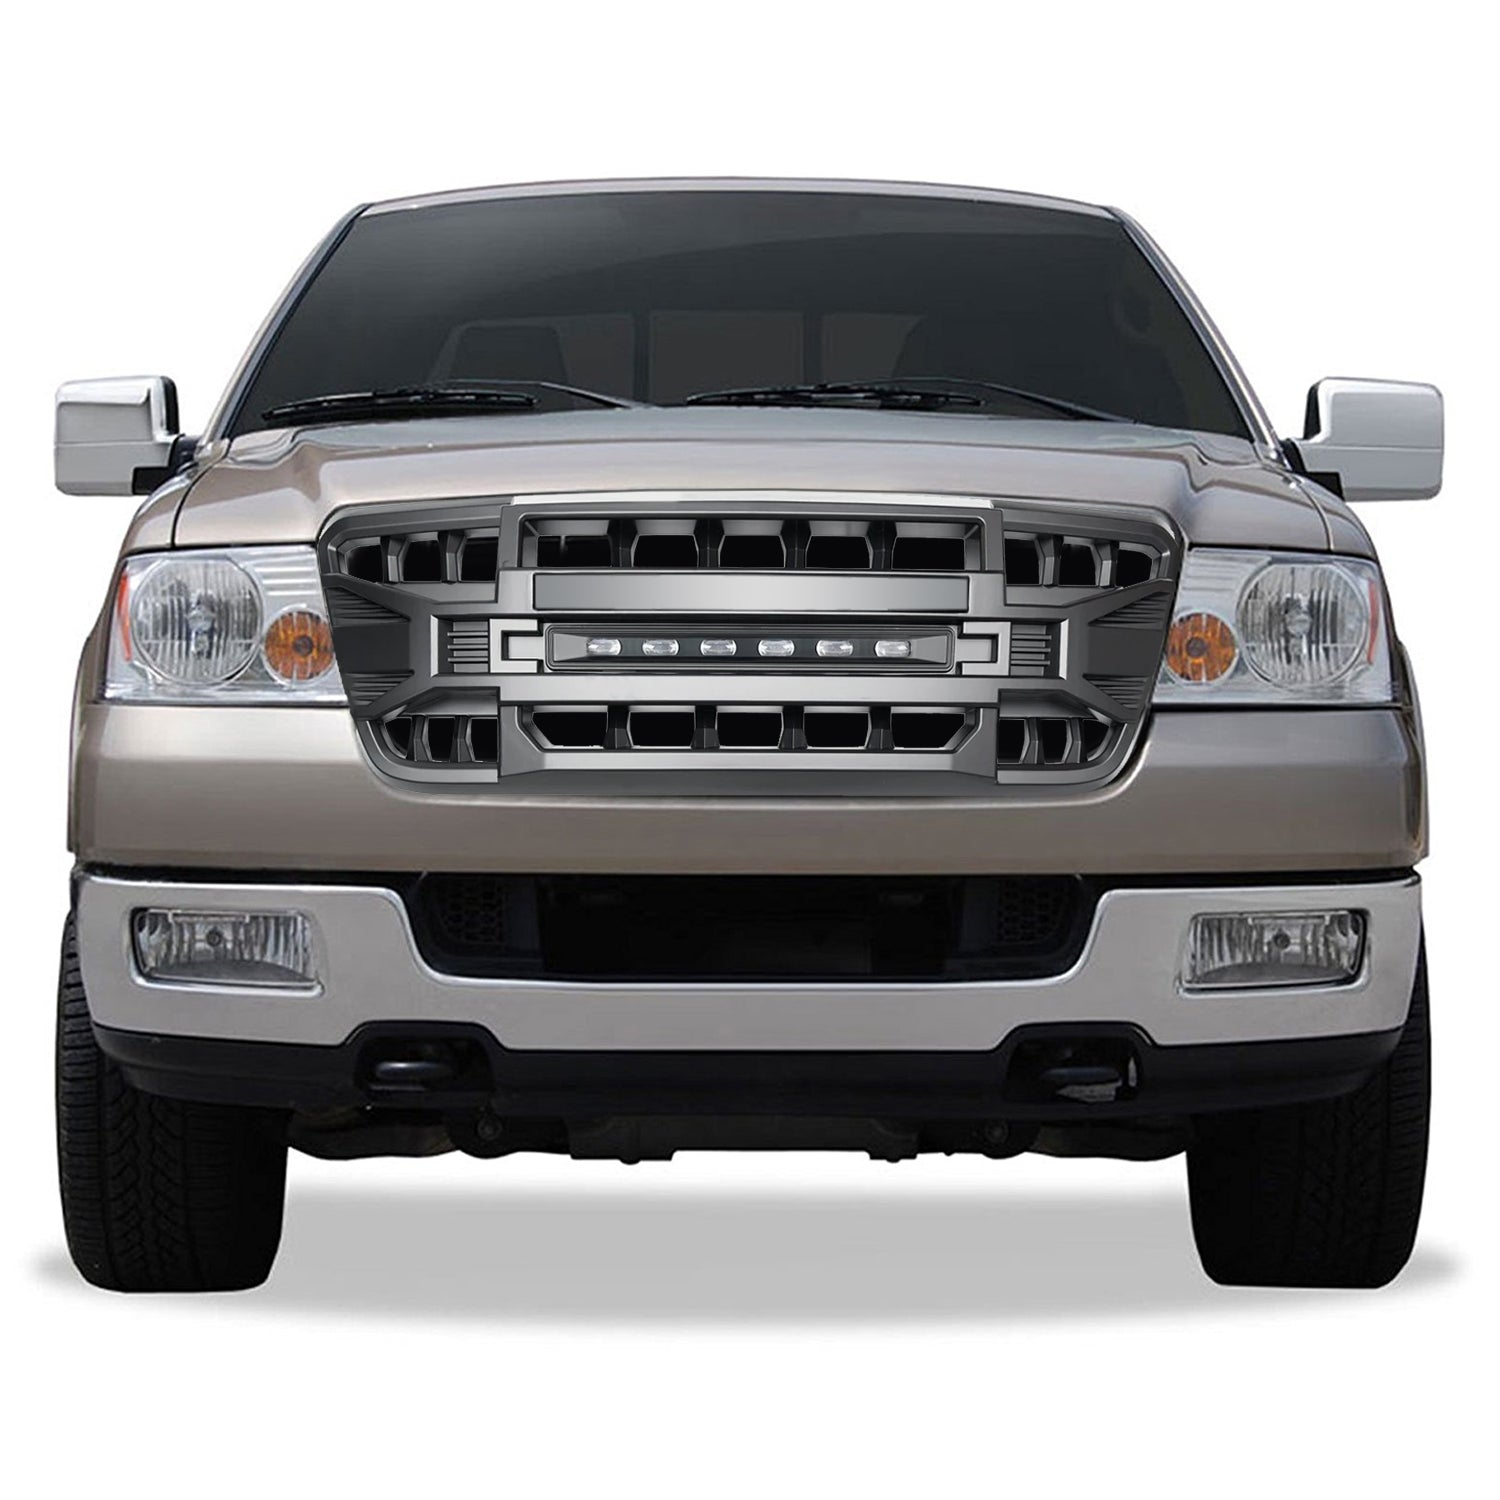 Armor Grille w/Off-Road Lights for 2004-2008 Ford F150